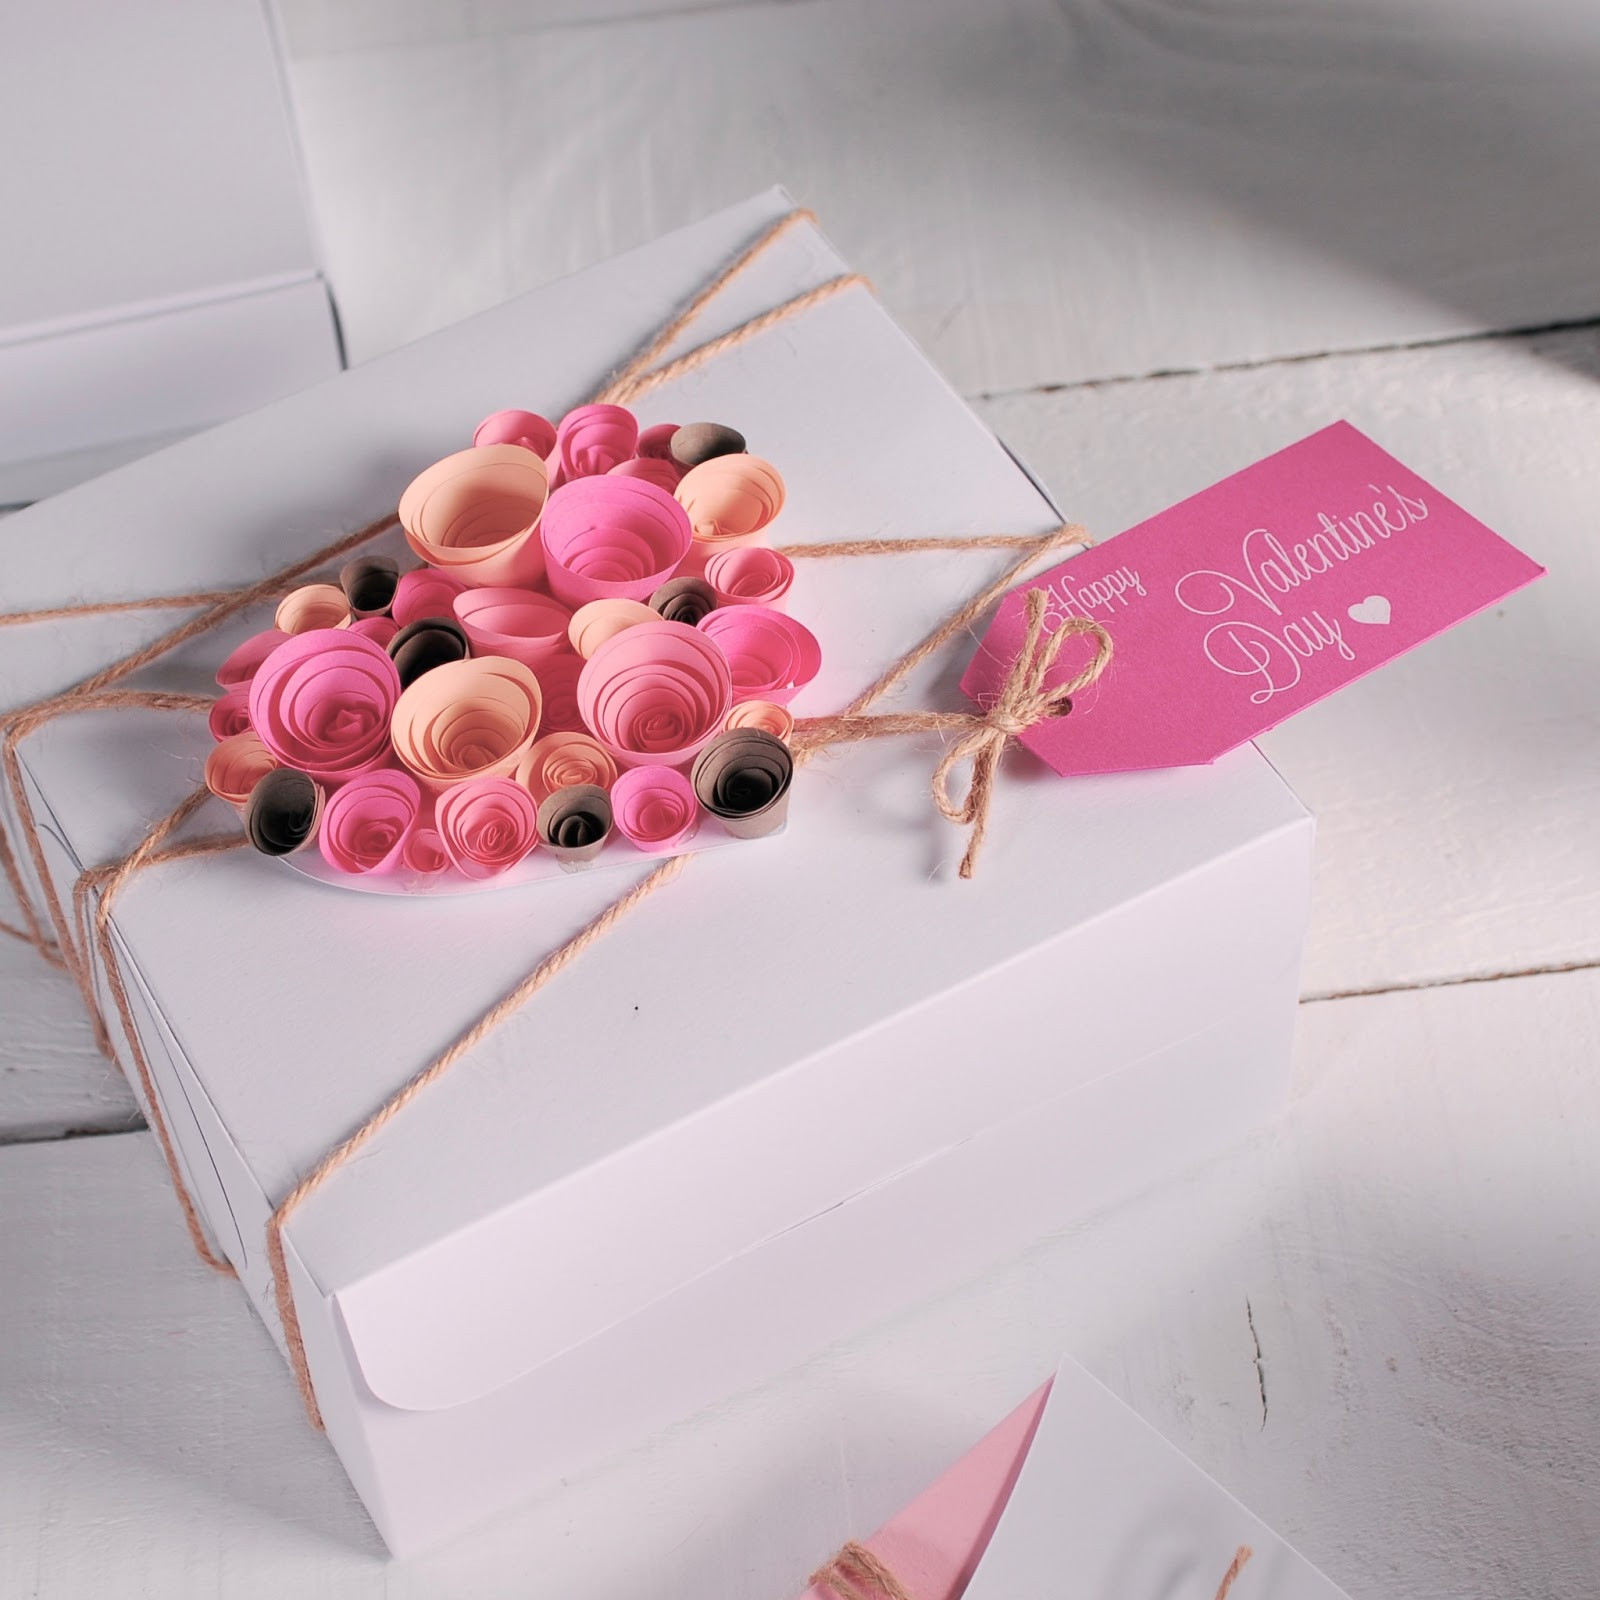 Valentines Day Gift Box Ideas
 Gift wrapping ideas for Valentines Day How to decorate a